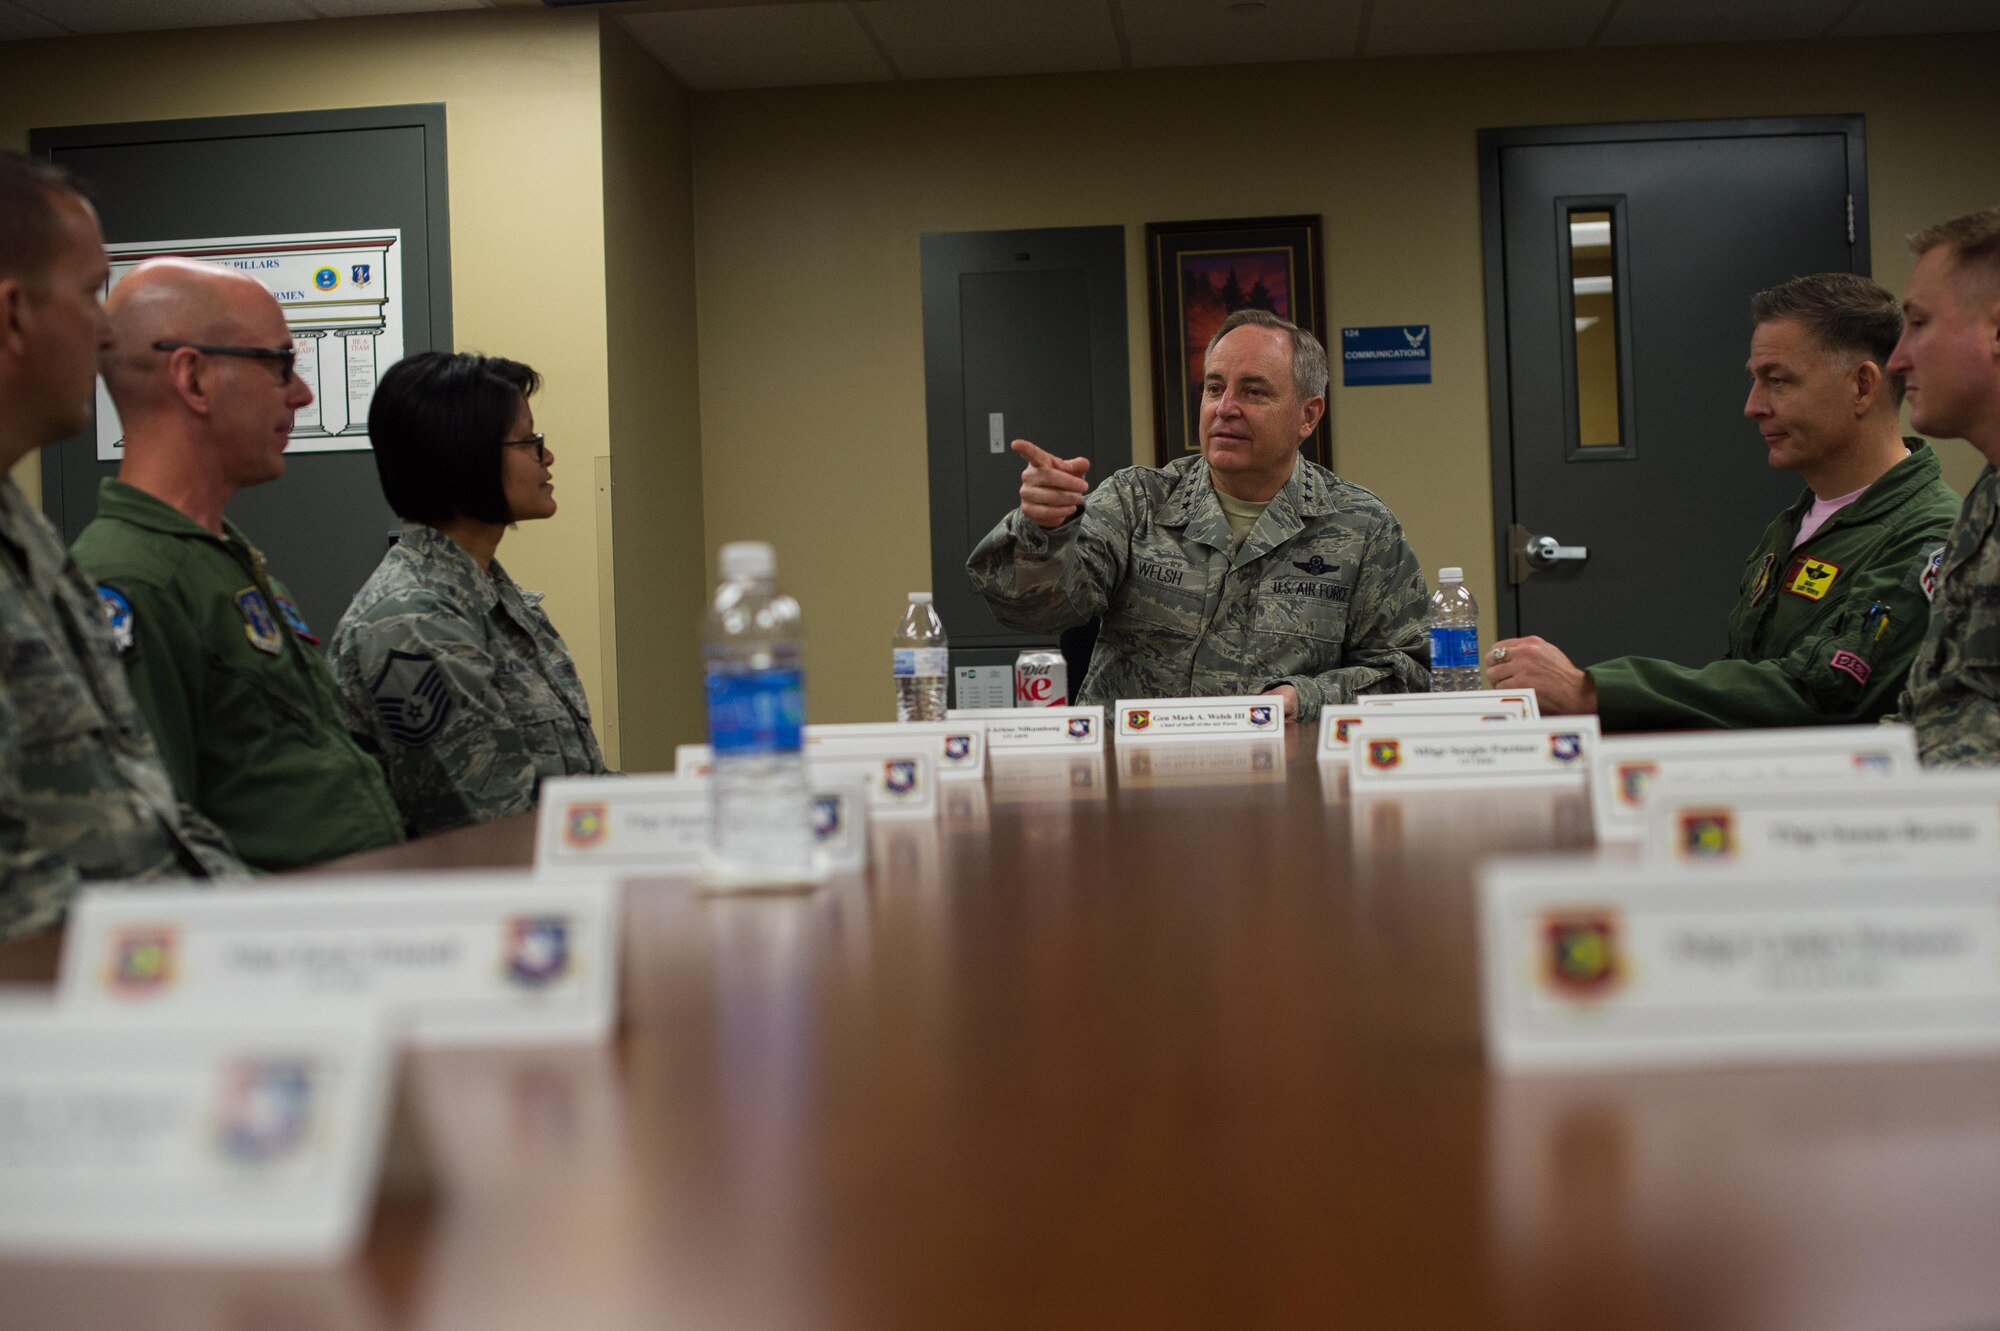 Gen. Mark Welsh, Chief of Staff of the U.S. Air Force, visits with enlisted airmen from the 137th and 507th Air Refueling Wings at Tinker Air Force Base, Oklahoma, April 11, 2015. Welsh met with airmen to ensure the needs of all Airmen are being considered. (Air National Guard photo by Airman 1st Class Tyler Woodward)